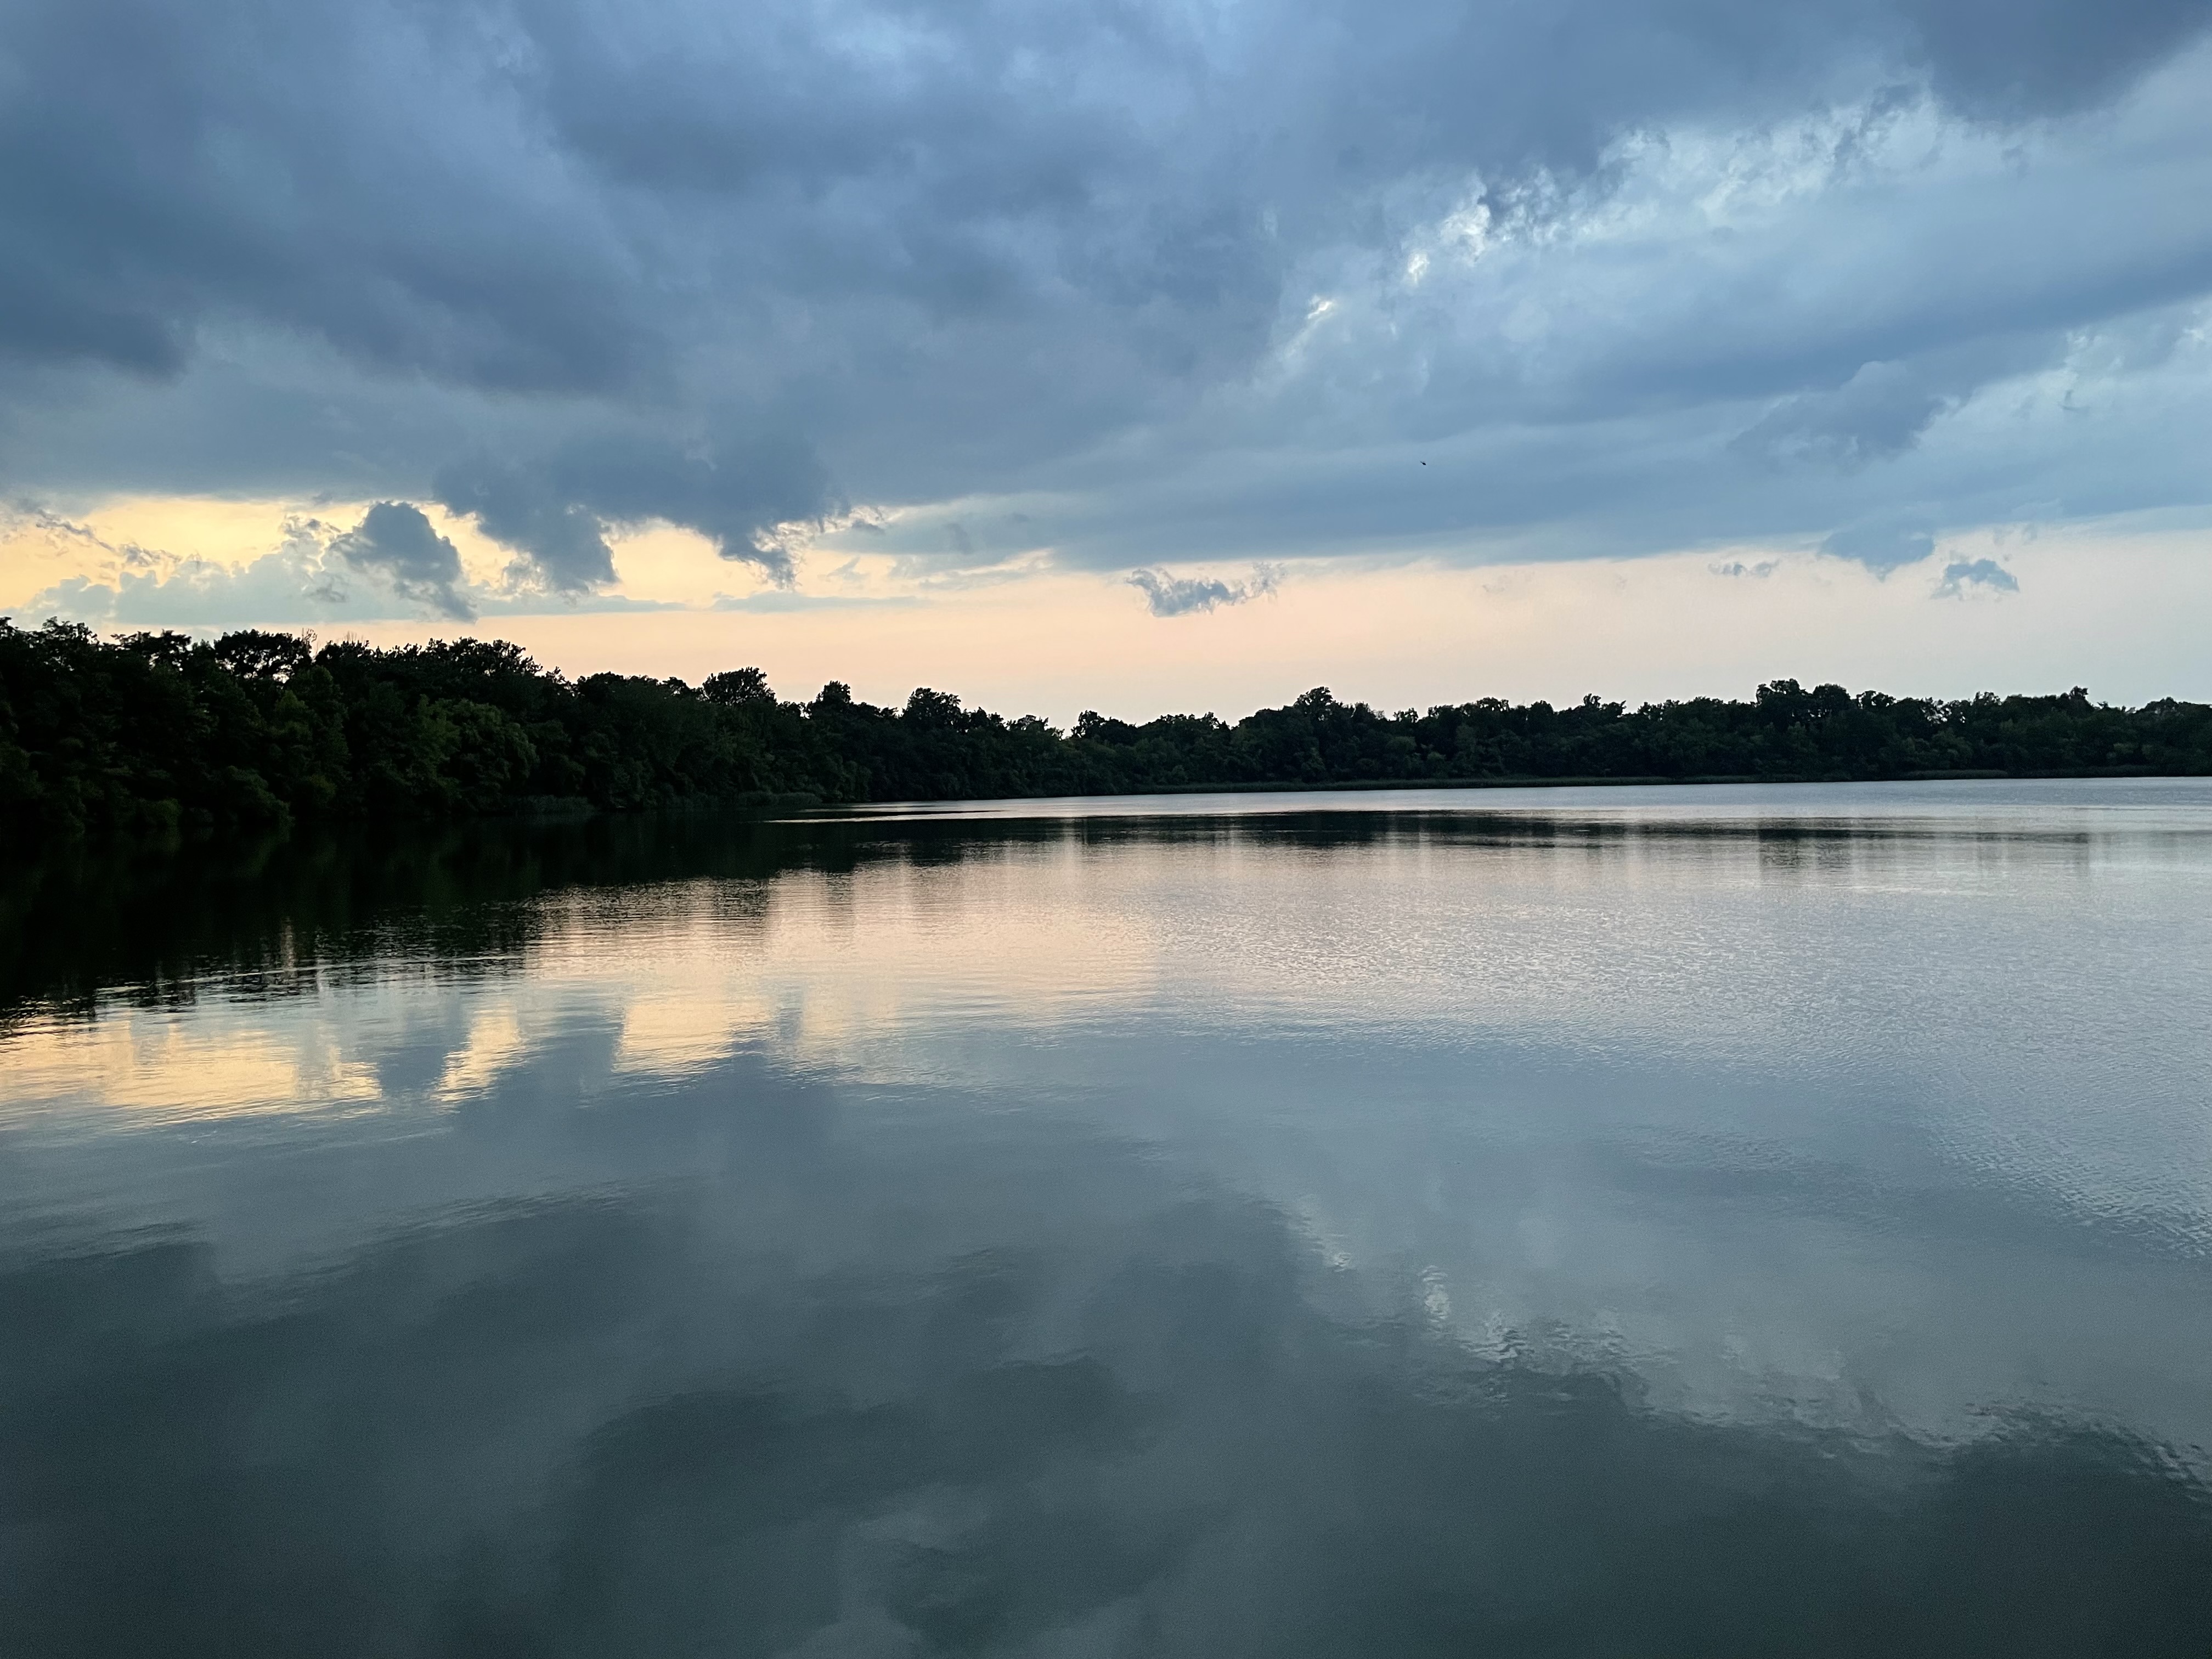 Evening View of Strawberry Mansion Reservoir